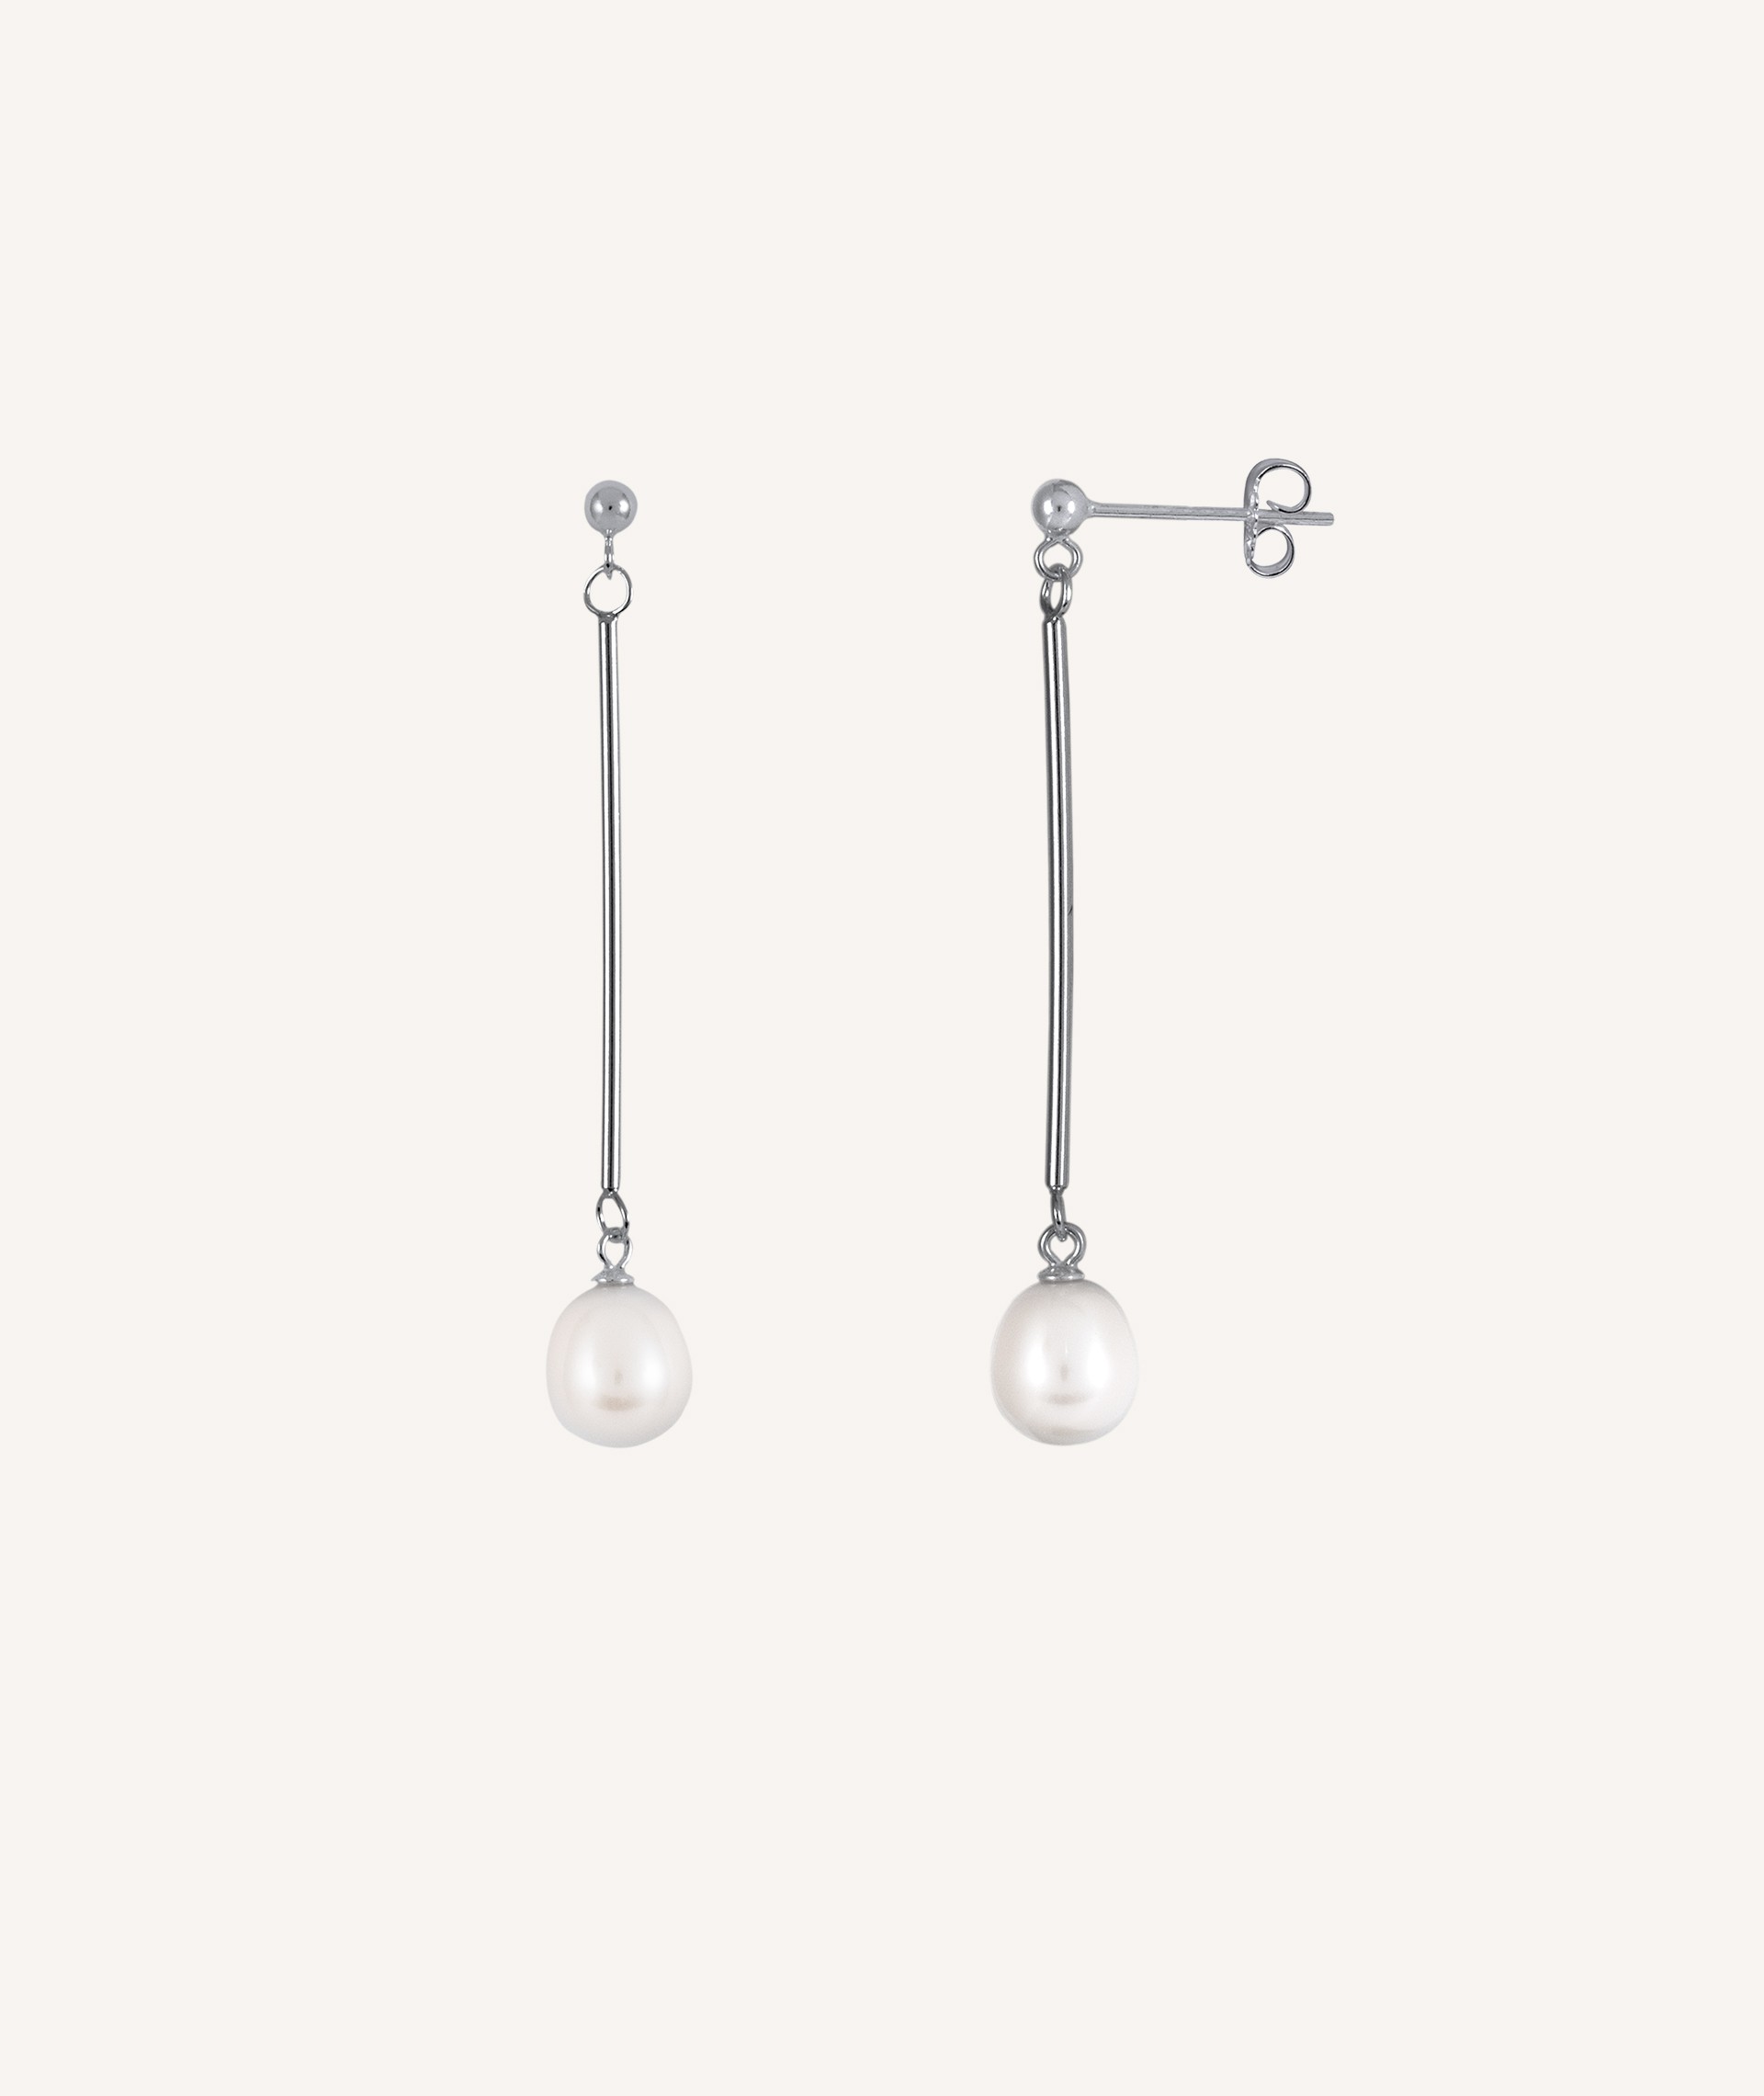 Earrings Silver Plated Double chains Pearls